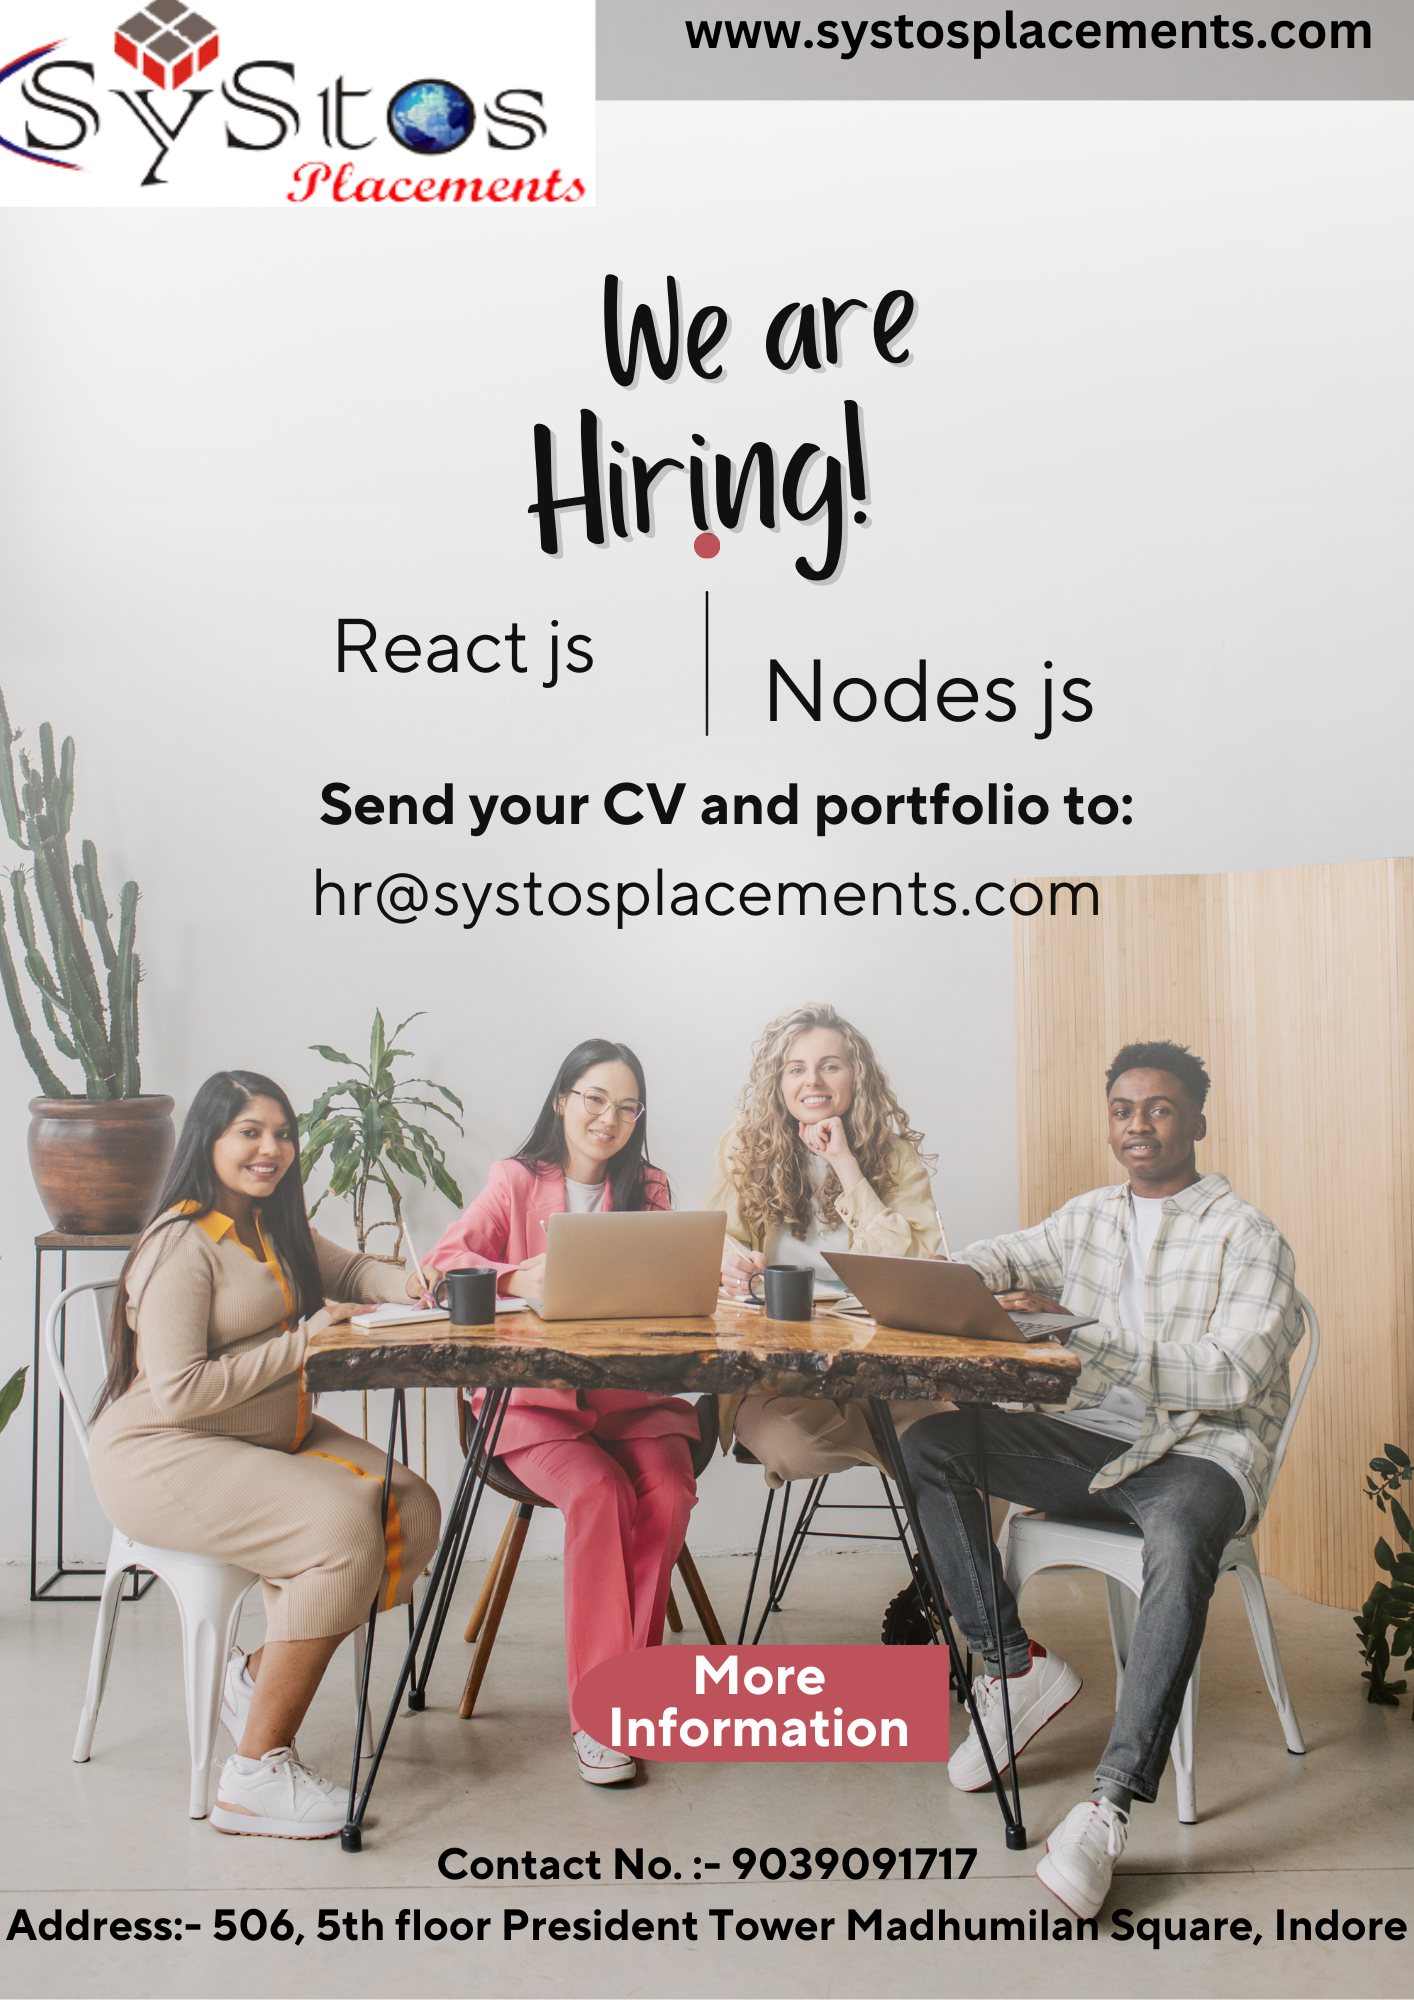 _ Se www.systosplacements.com

SVYSEL@s

Placements

We are
Hiring!

React js

Nodes js
i Send your CV and portfolio to:
hr@systosplacements.com